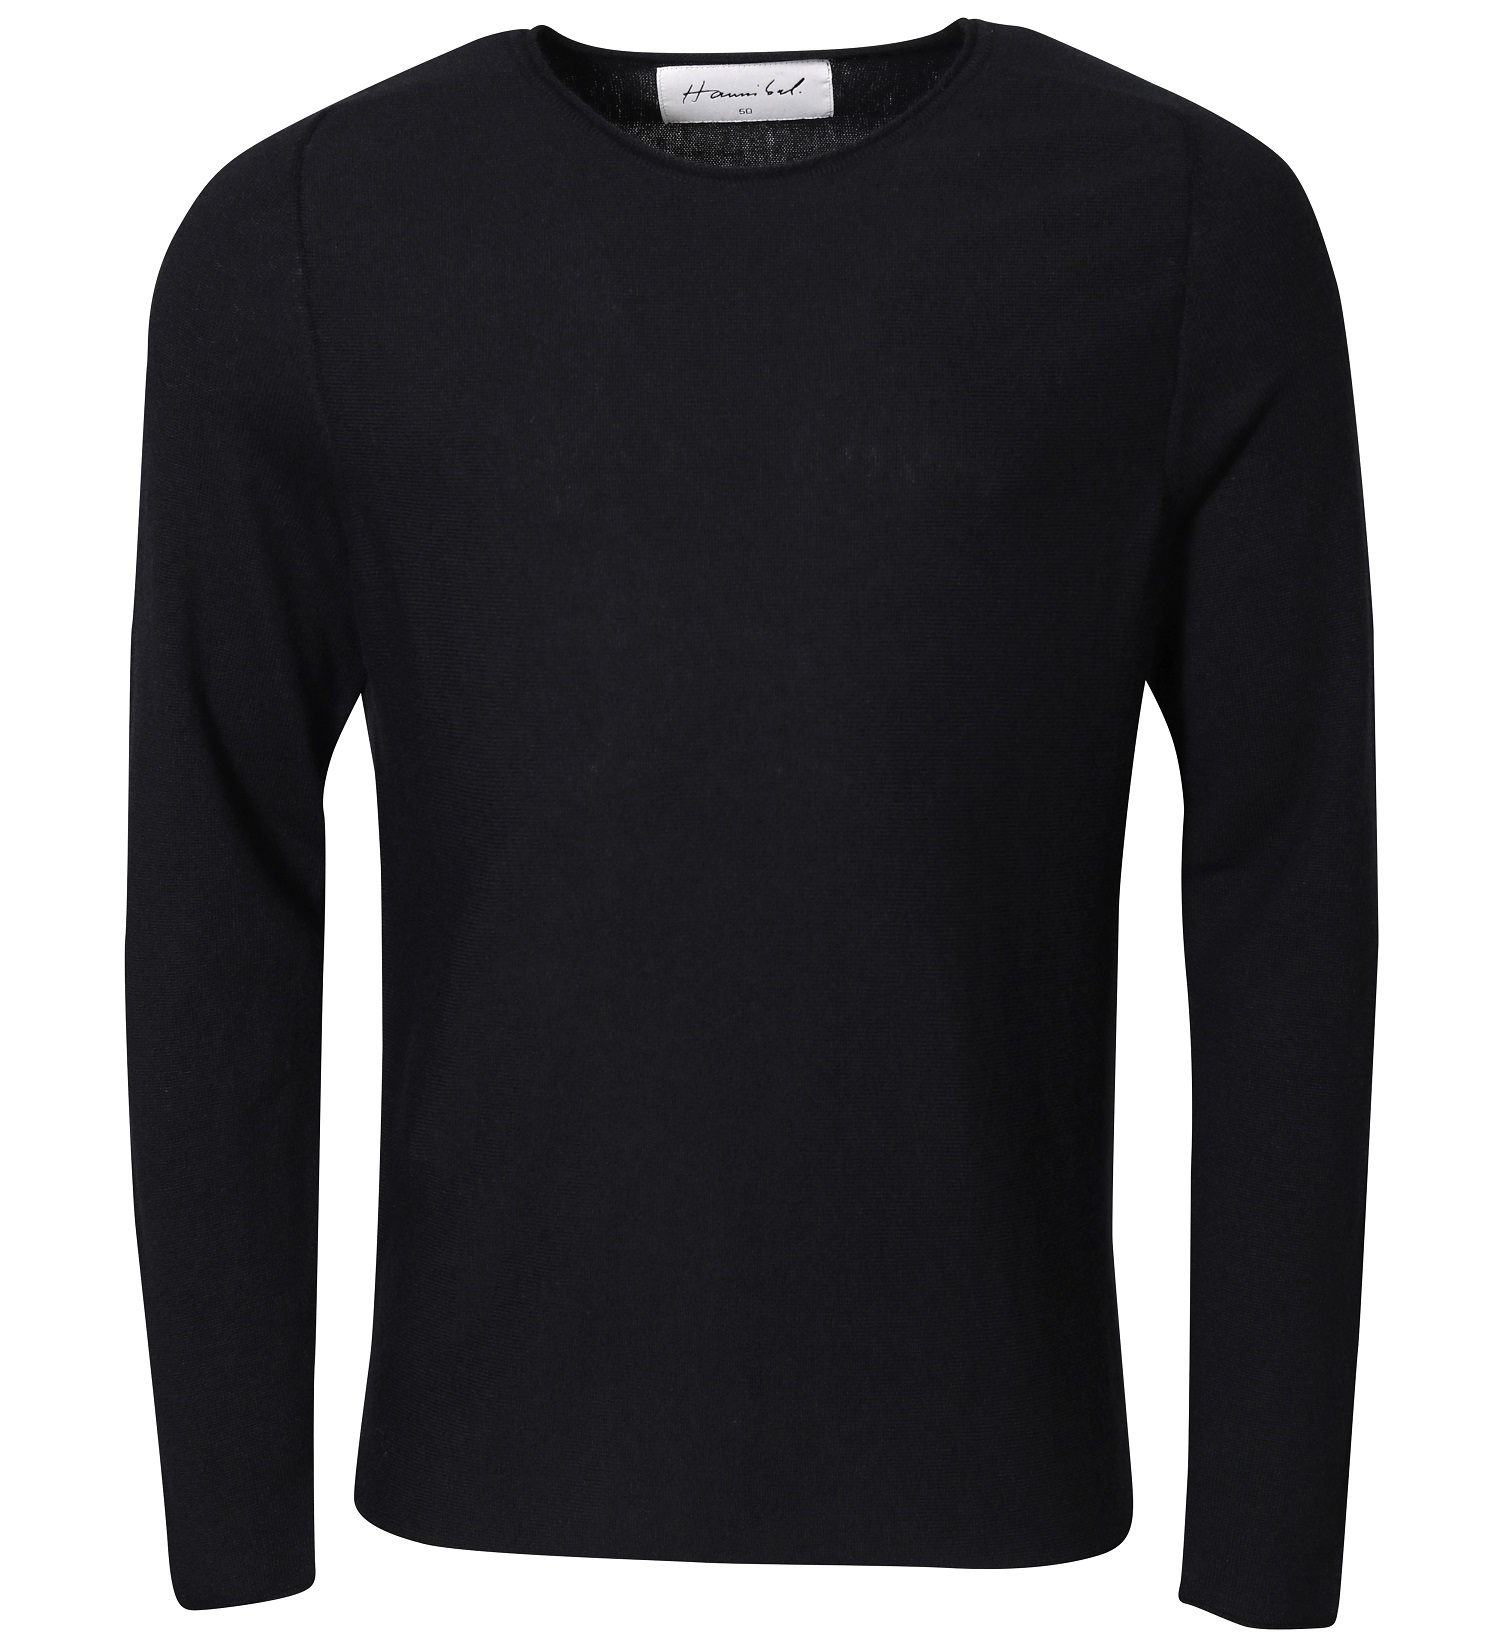 HANNIBAL. Knit Pullover Nevio in Charcoal 48